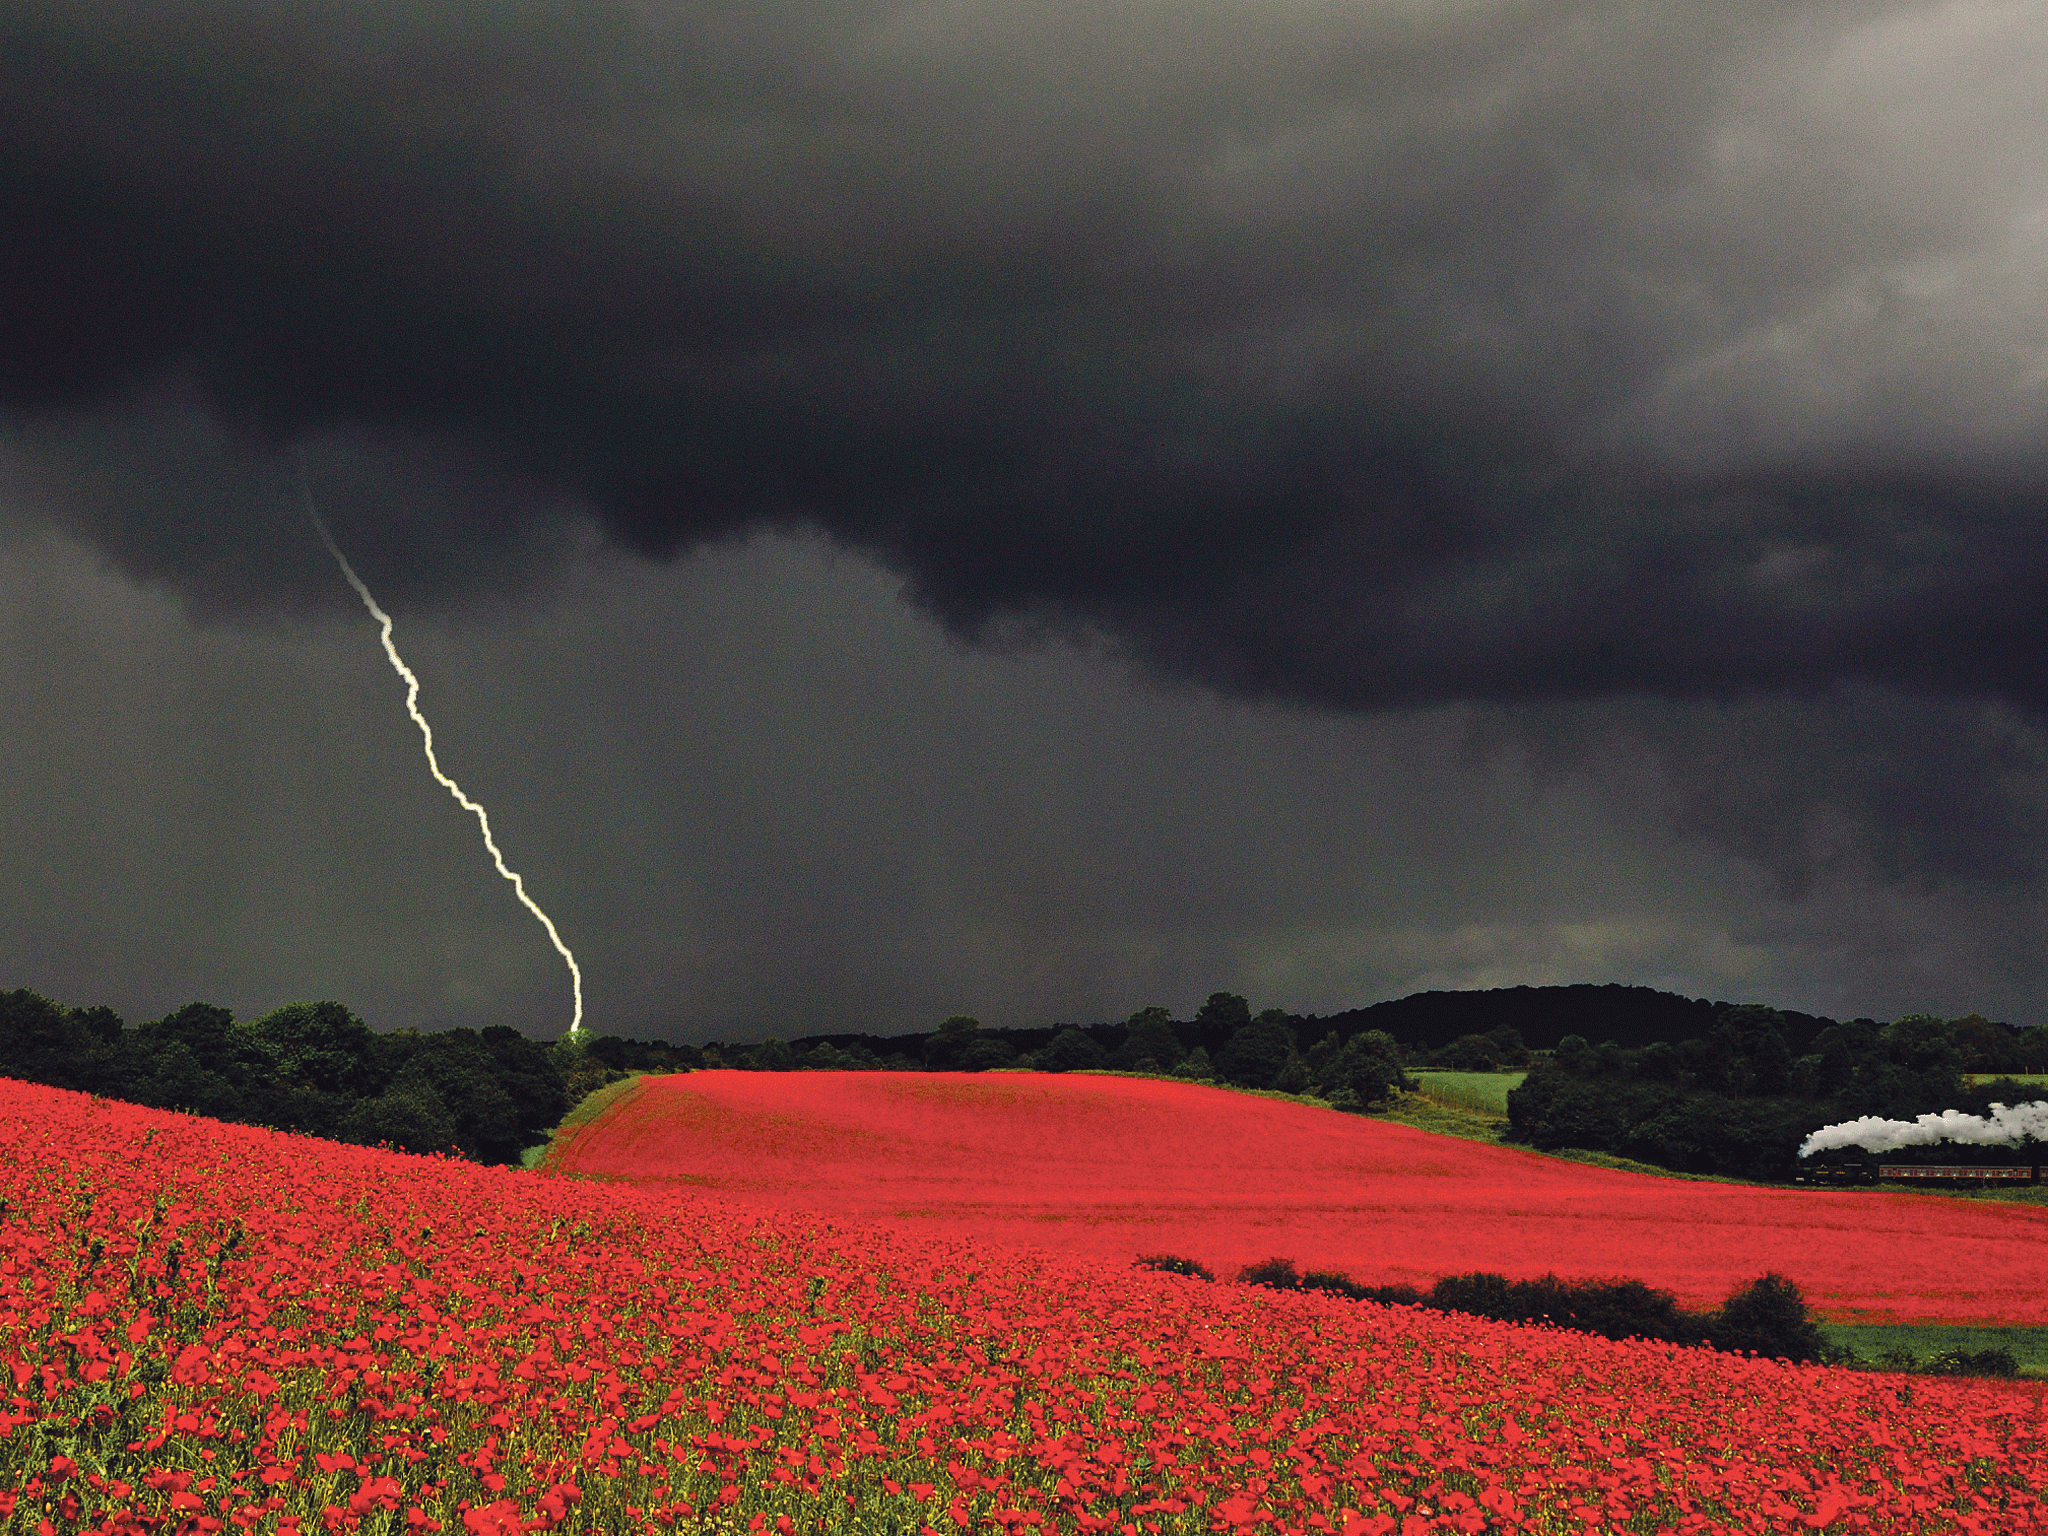 <p>1. Winner: Landscape category Storm over Blackstone (Worcestershire), by Dr Danny Beath</p>